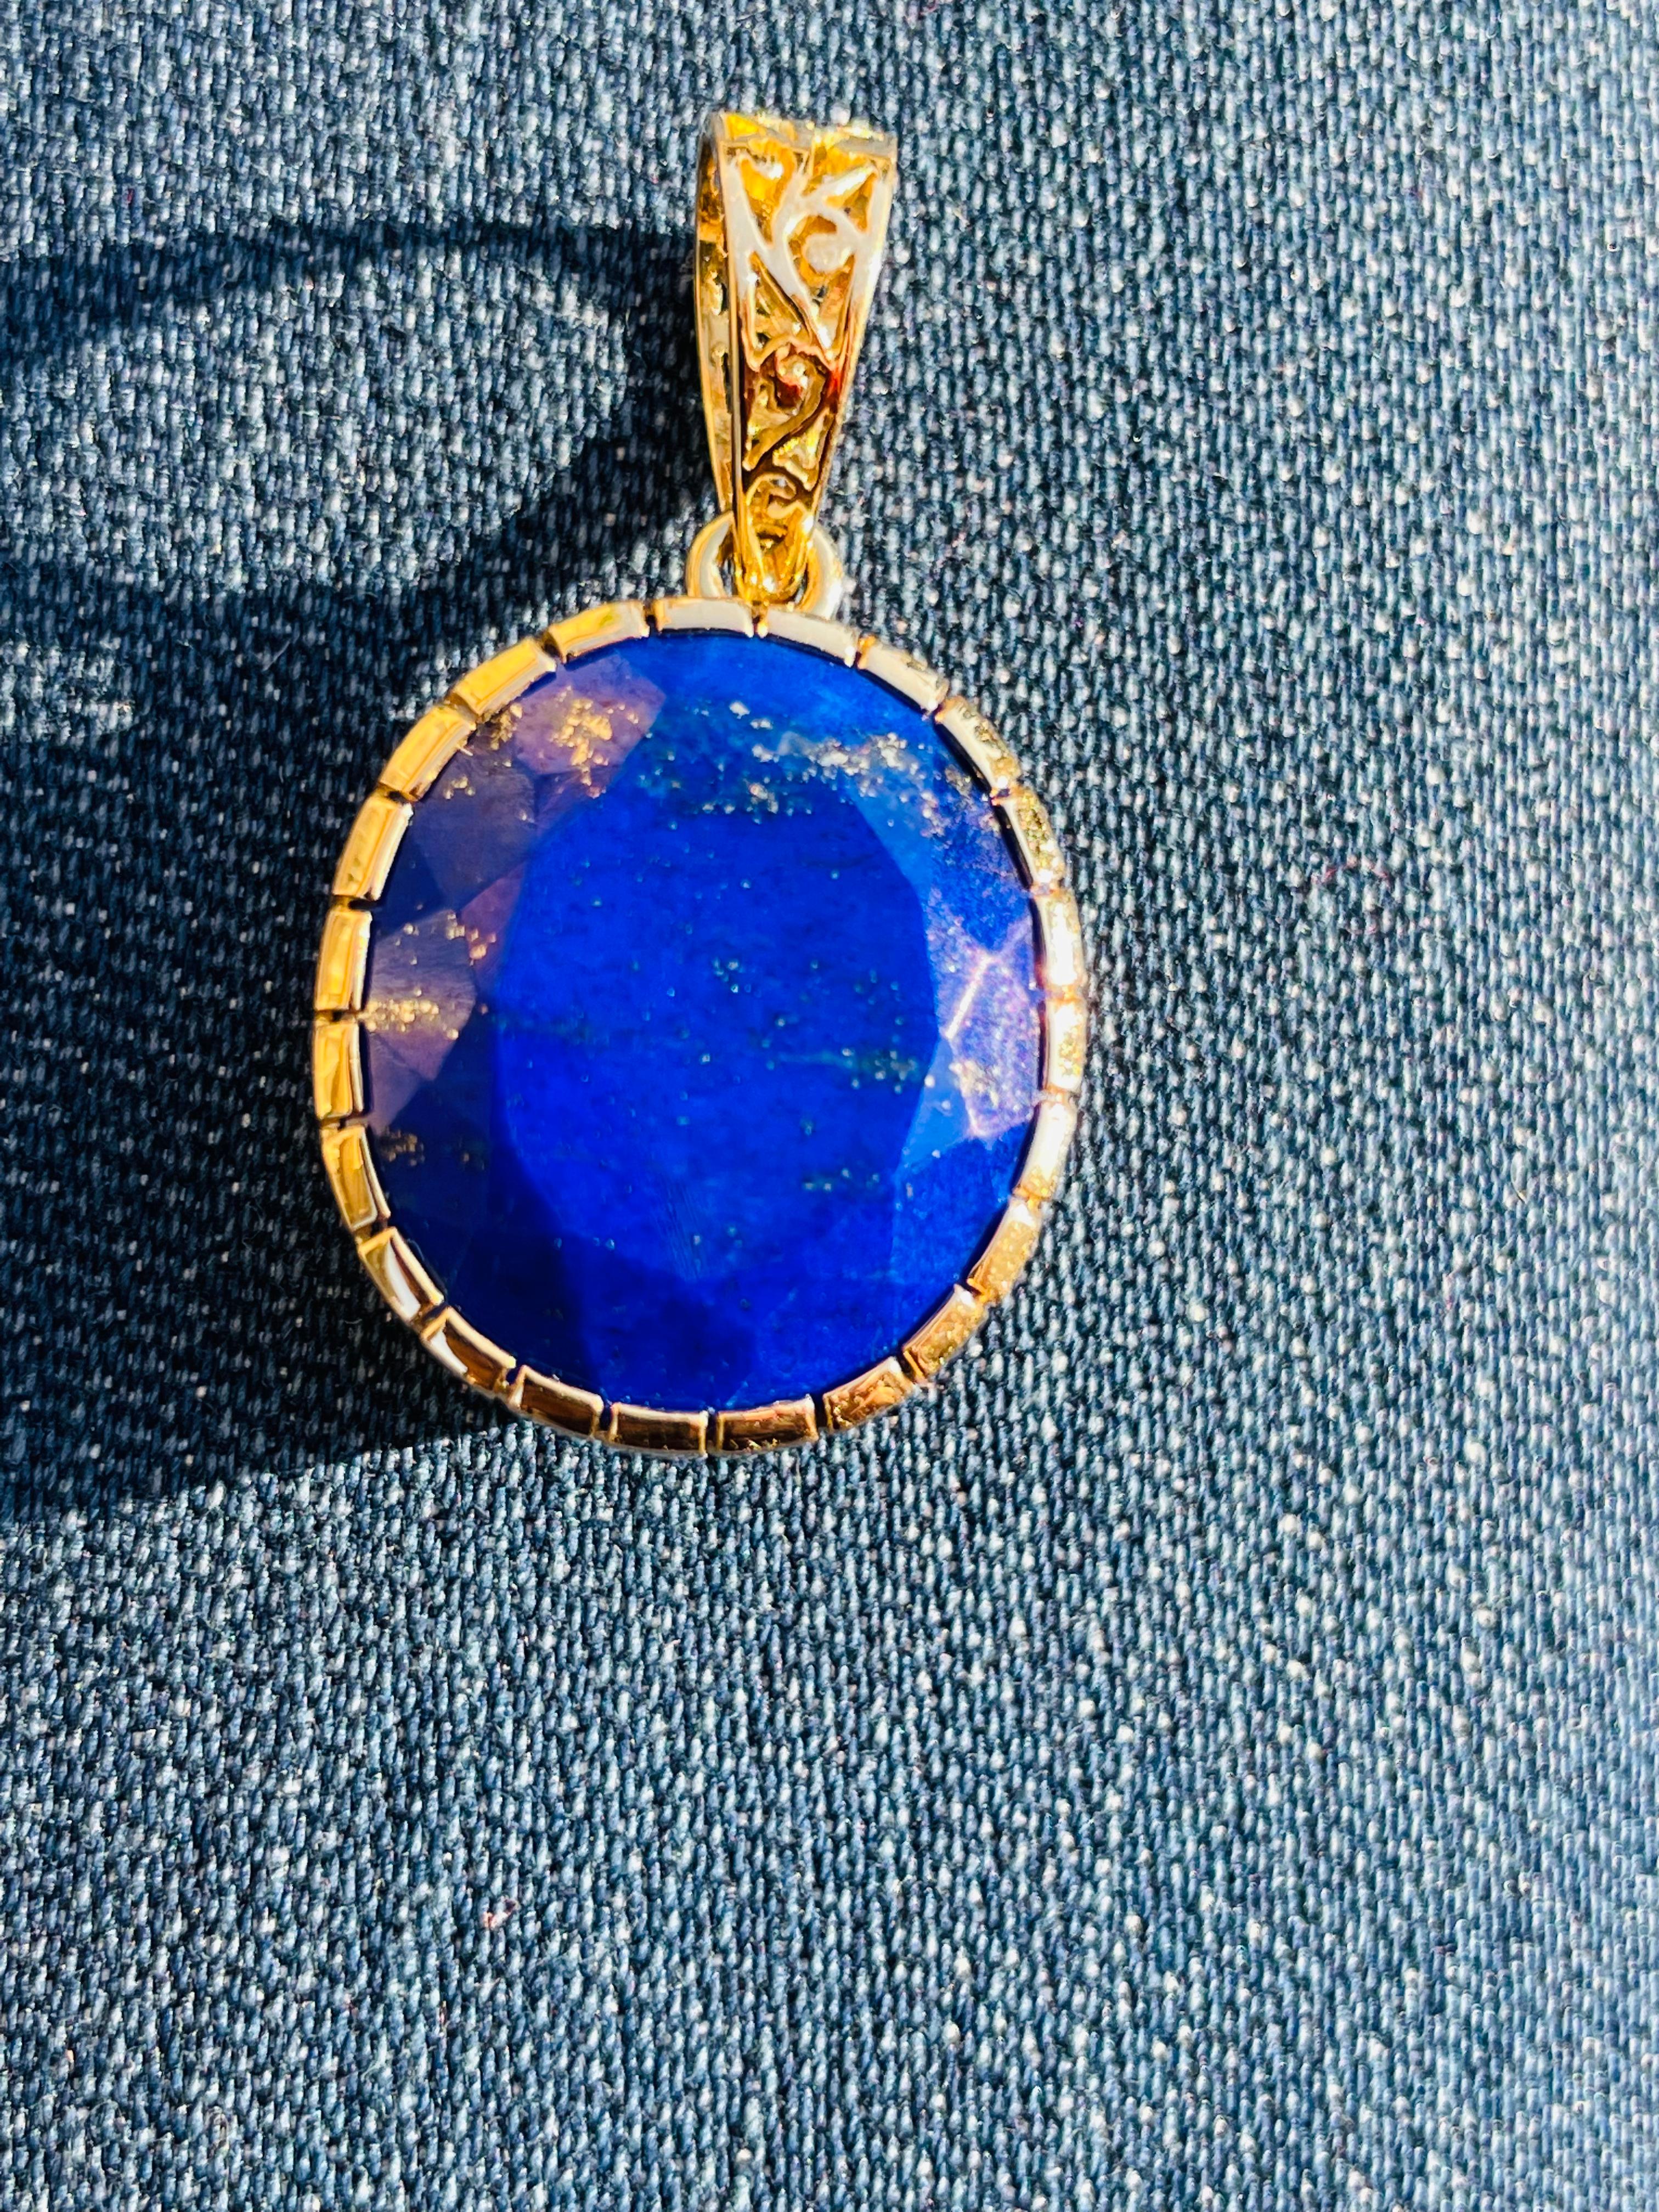 Lapis pendant in 18K Gold. It has a oval cut gemstone that completes your look with a decent touch. Pendants are used to wear or gifted to represent love and promises. It's an attractive jewelry piece that goes with every basic outfit and wedding